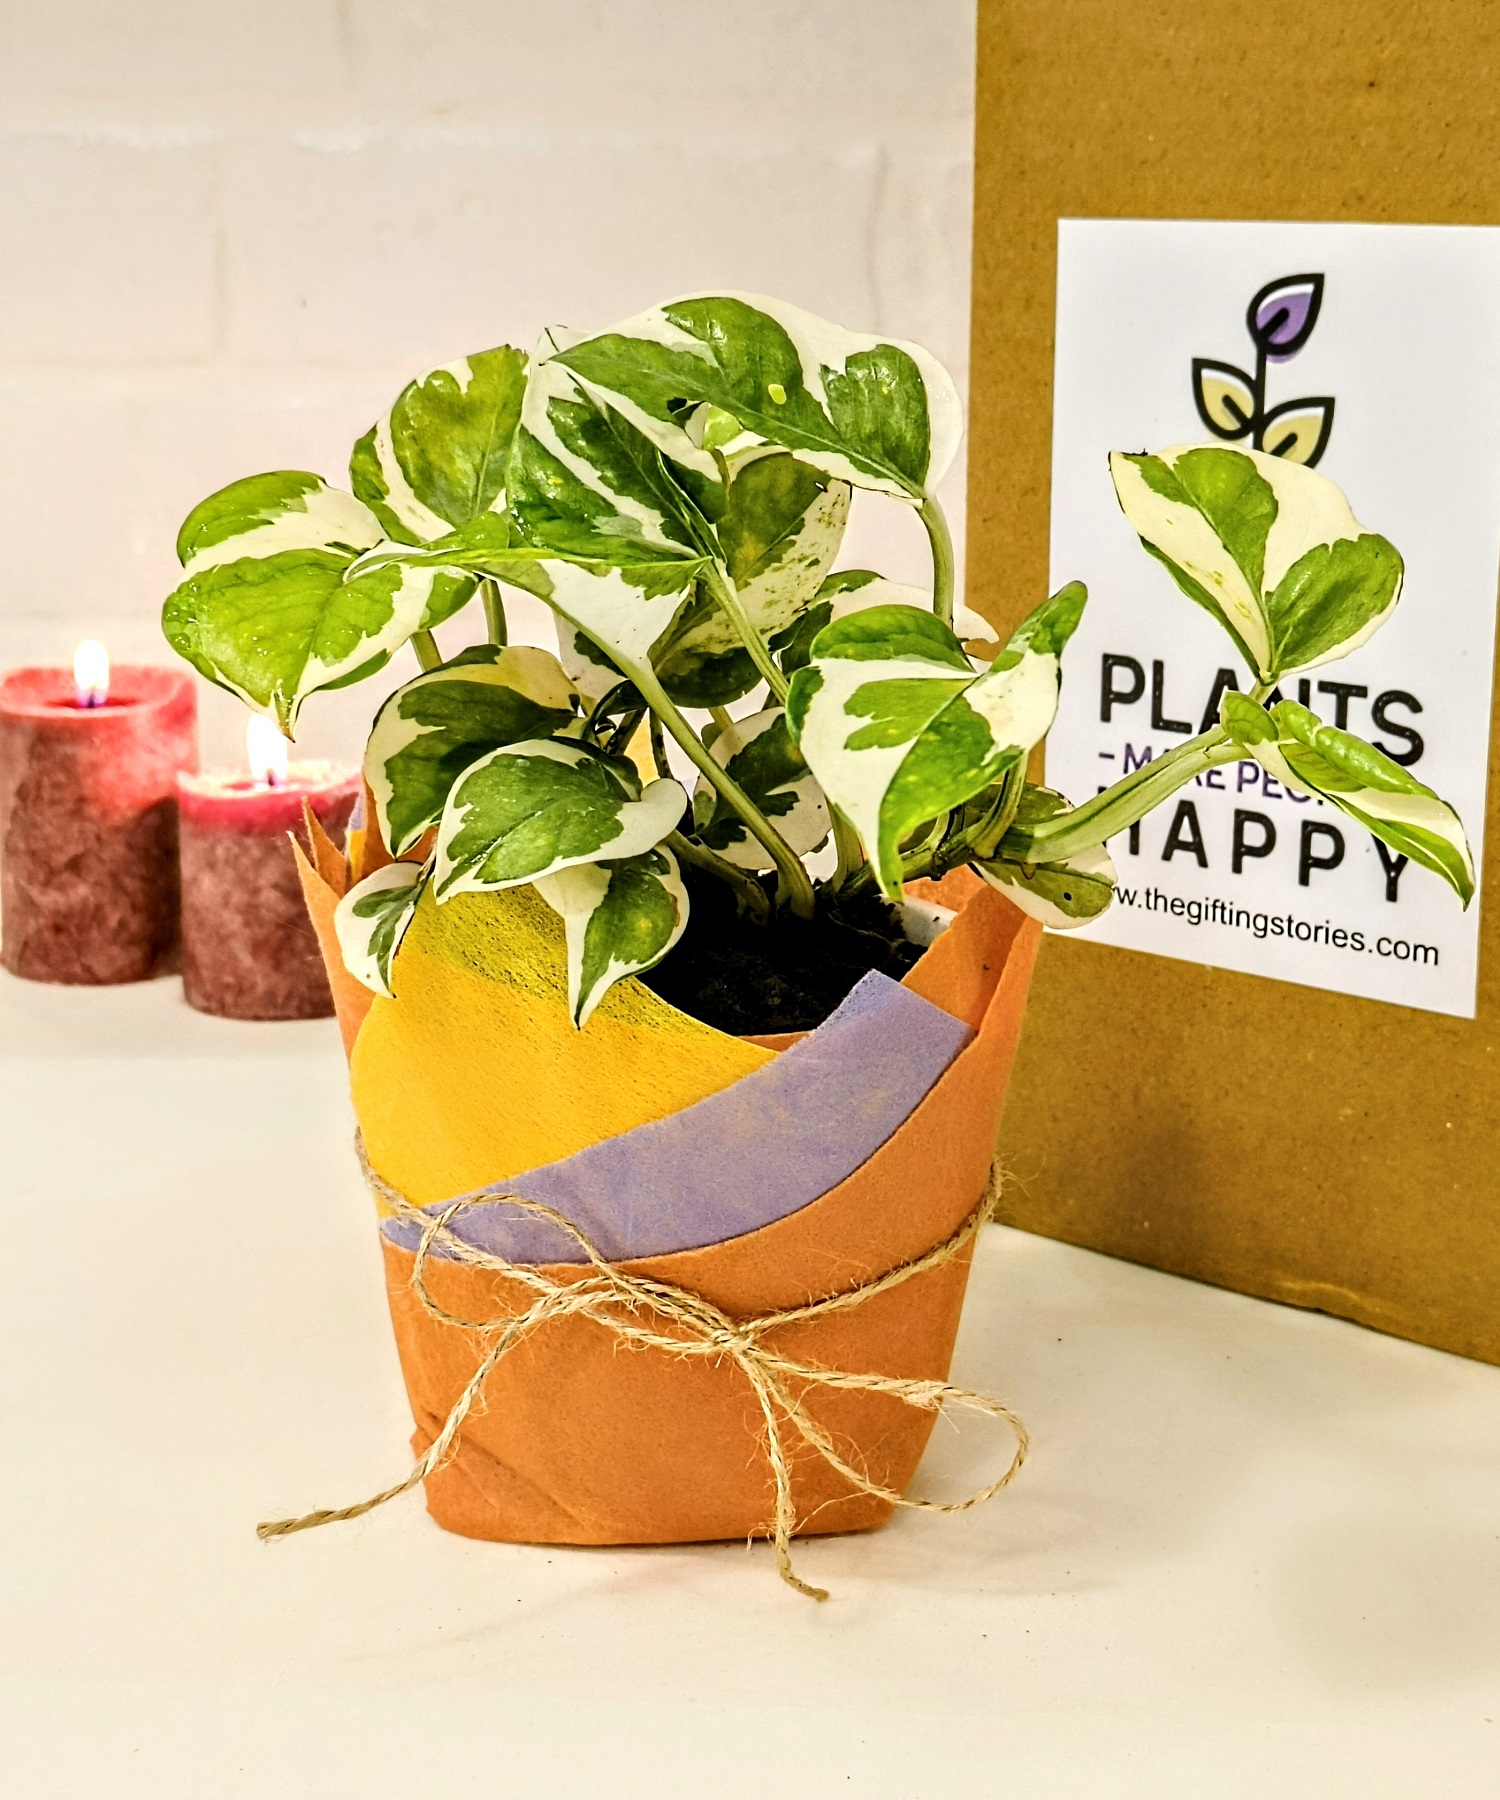 Buy Now Buy Corporate Gift Online - Money Plant (Live Plant)Indoor Oxygen &  Air Purifier Plant with Pot ST1 and Decotative Materials Laxmi ATM Card -  Visit now for best prices and